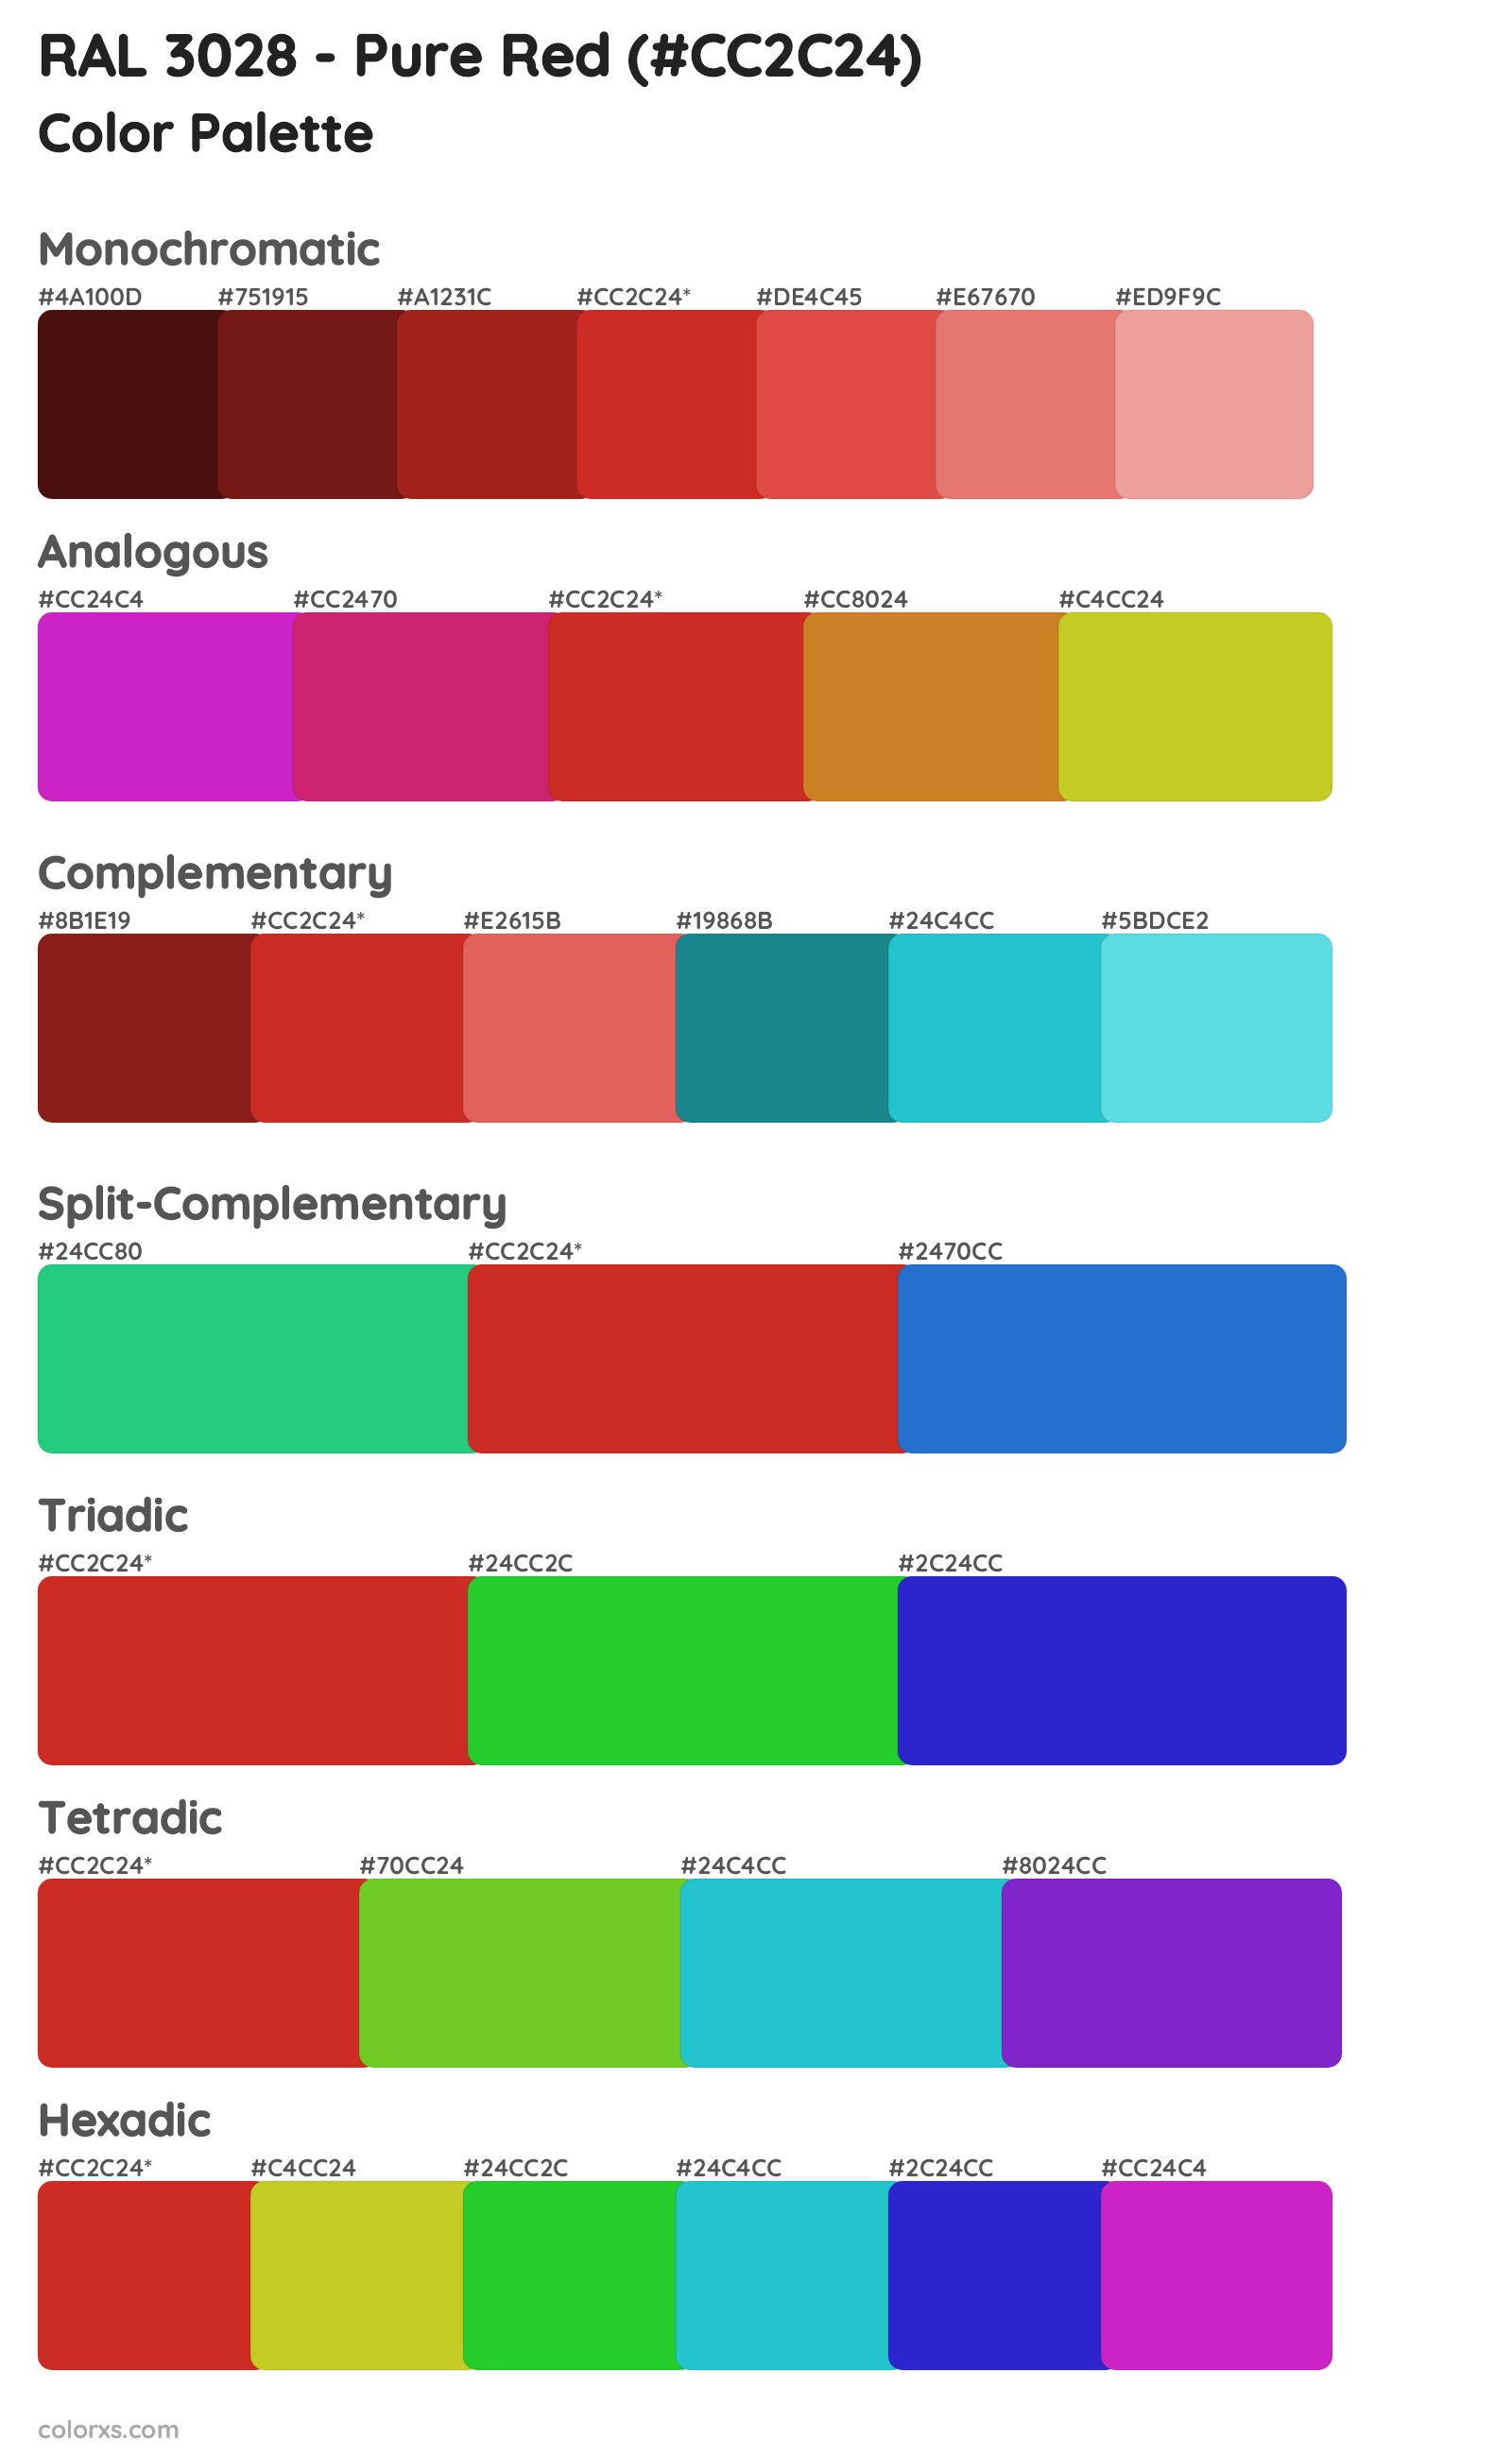 RAL 3028 - Pure Red Color Scheme Palettes